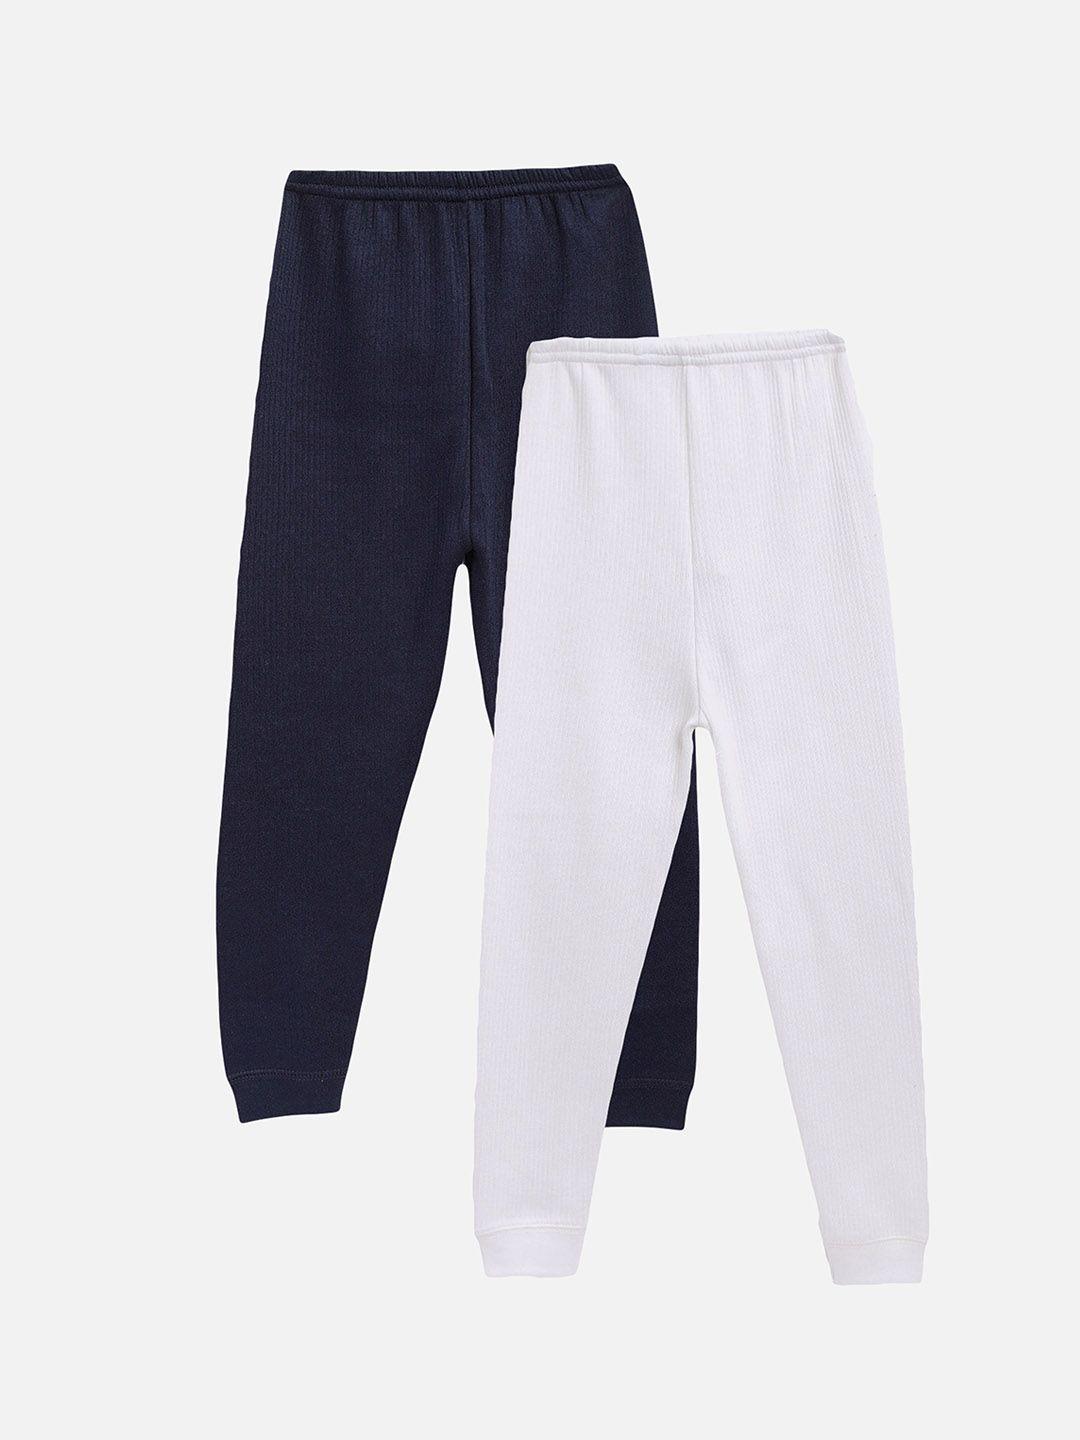 kanvin-boys-pack-of-2-navy-blue-and-white-thermal-bottoms